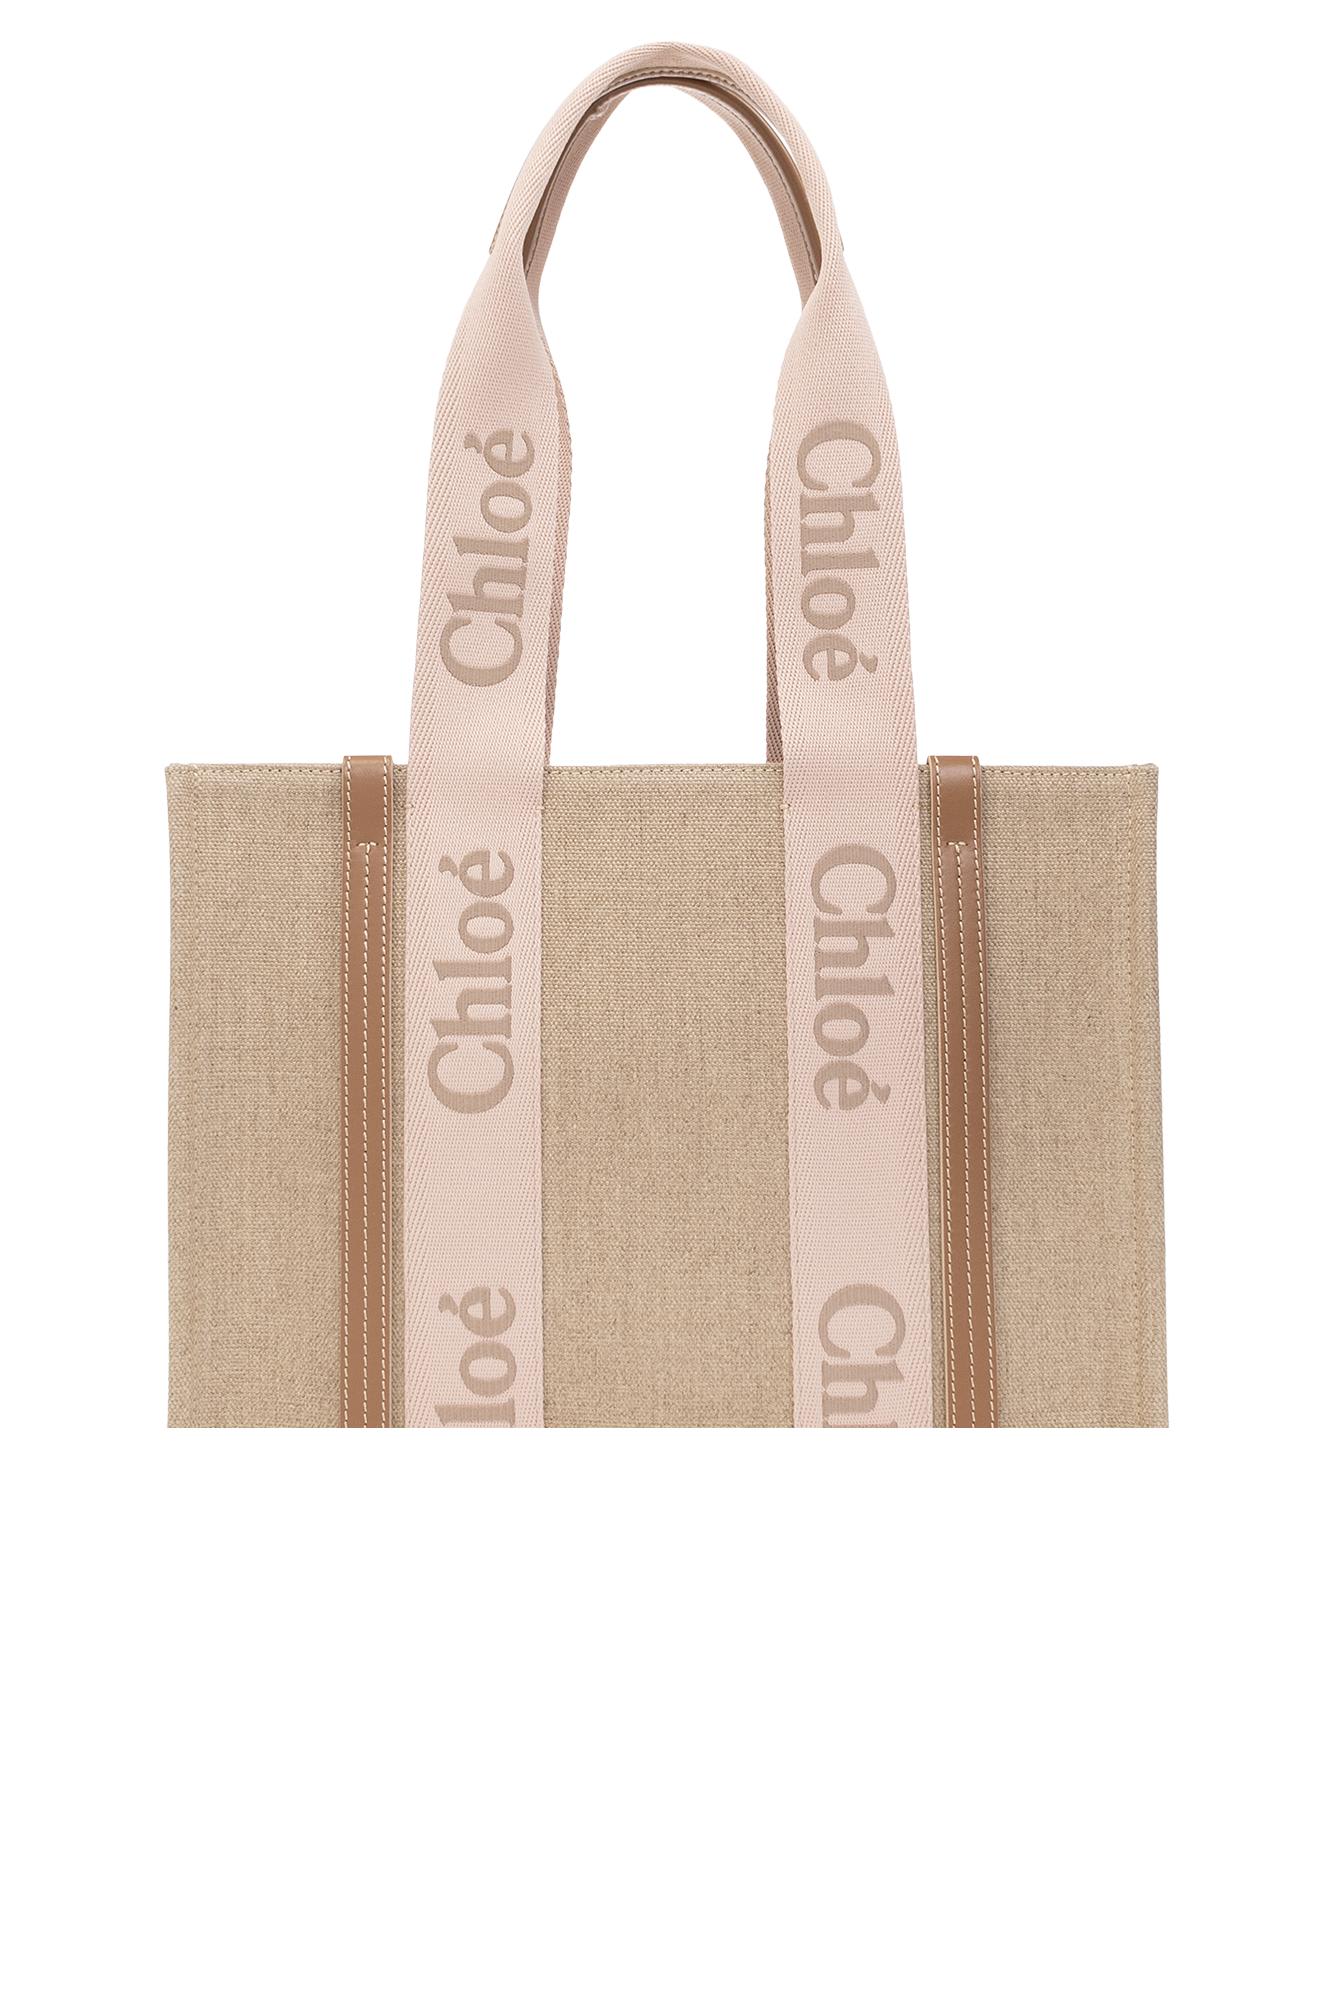 Chloé Pink And Beige Woody Medium Shopping Bag With Shoulder Strap